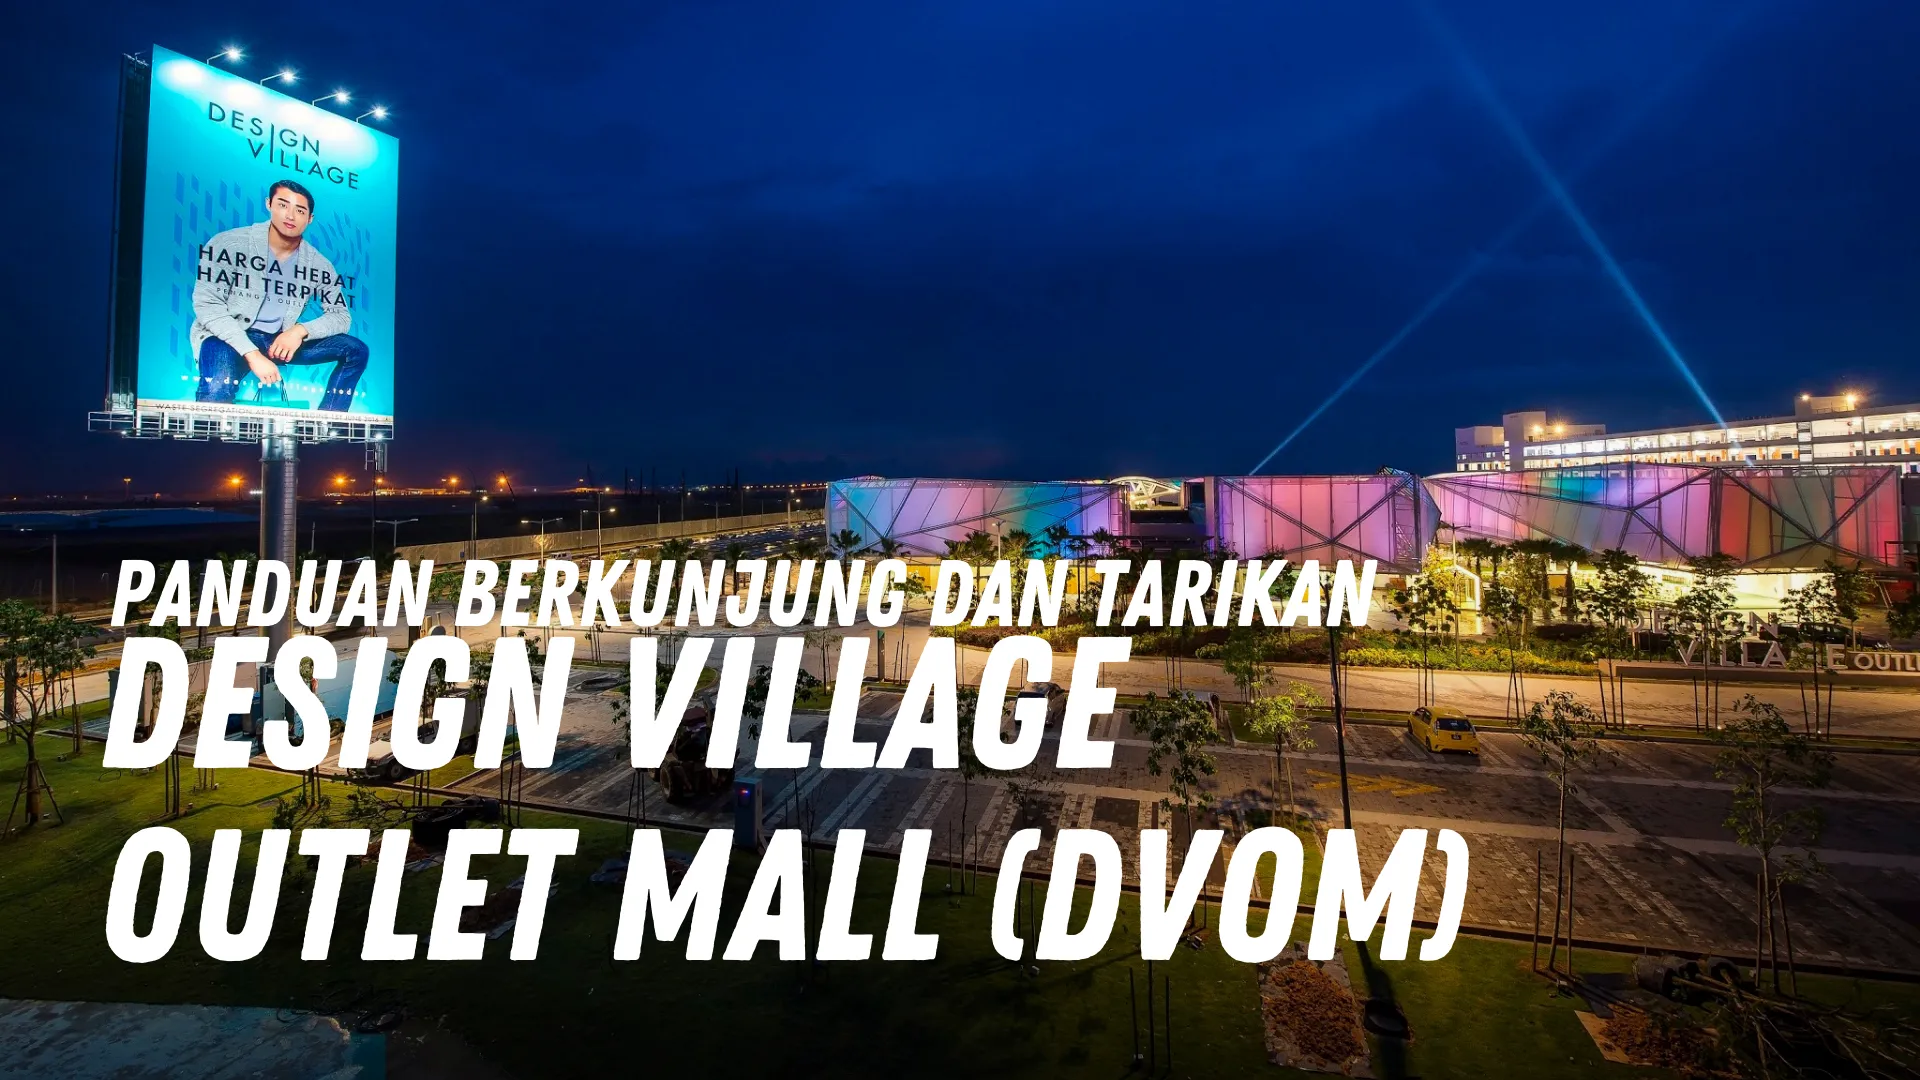 Review Design Village Outlet Mall (DVOM) Malaysia